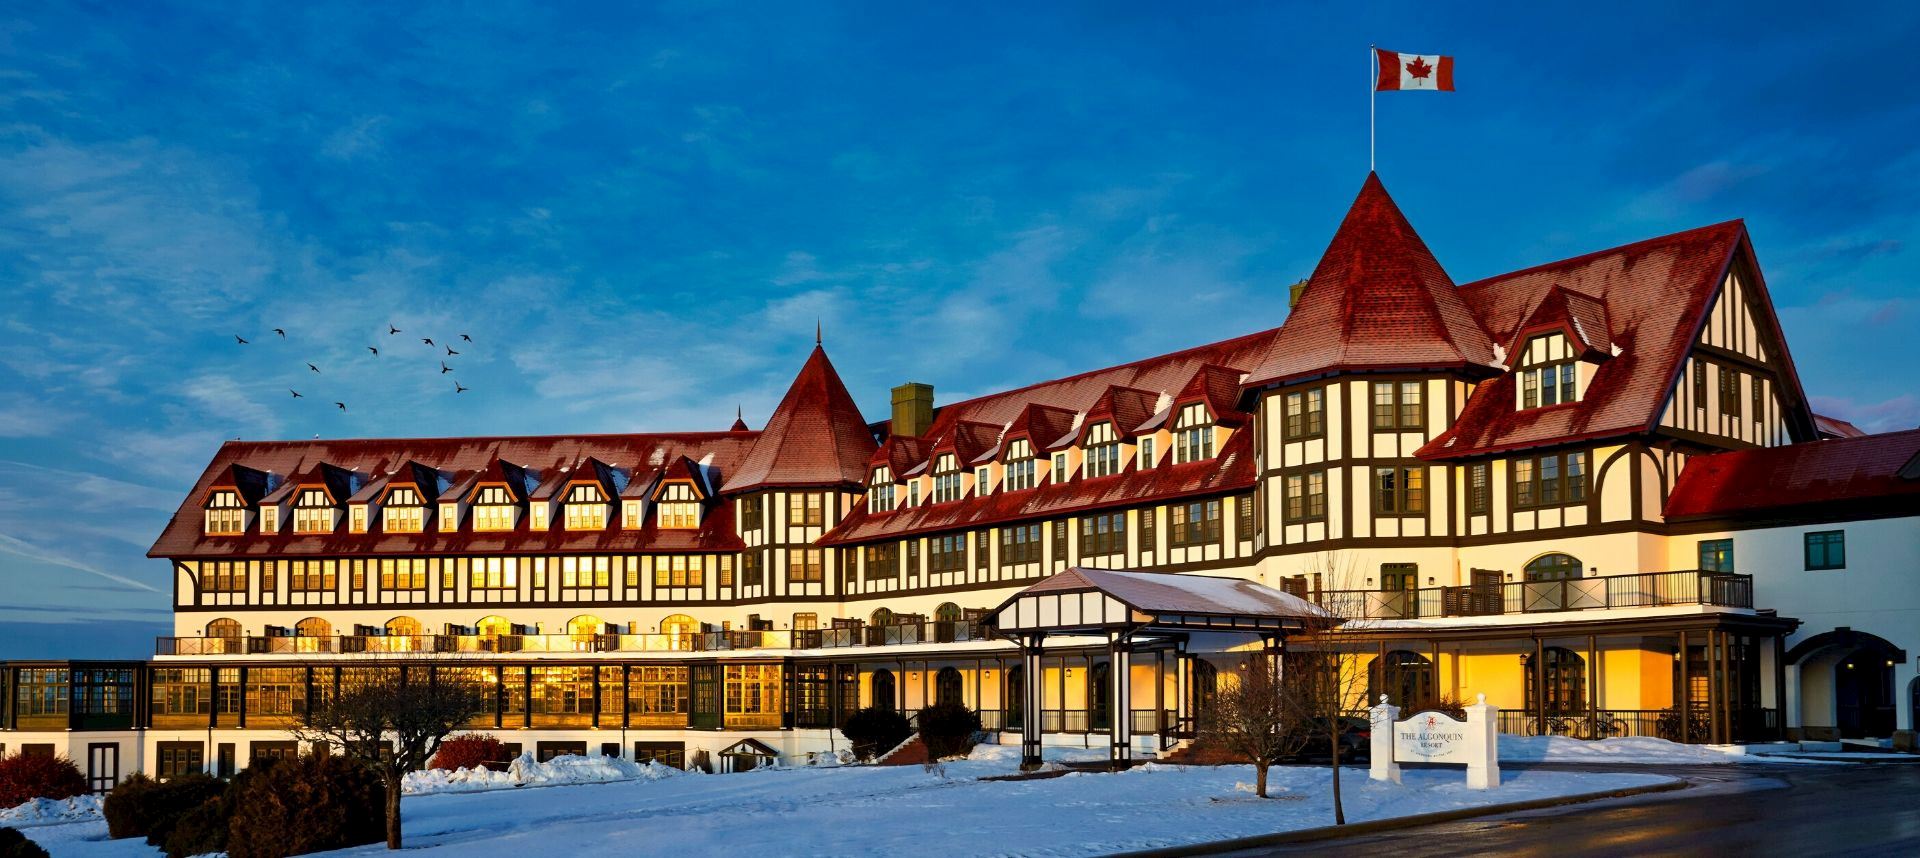 Hotels in St. Andrews Nb Canada: Discover the Best Accommodations for an Unforgettable Stay